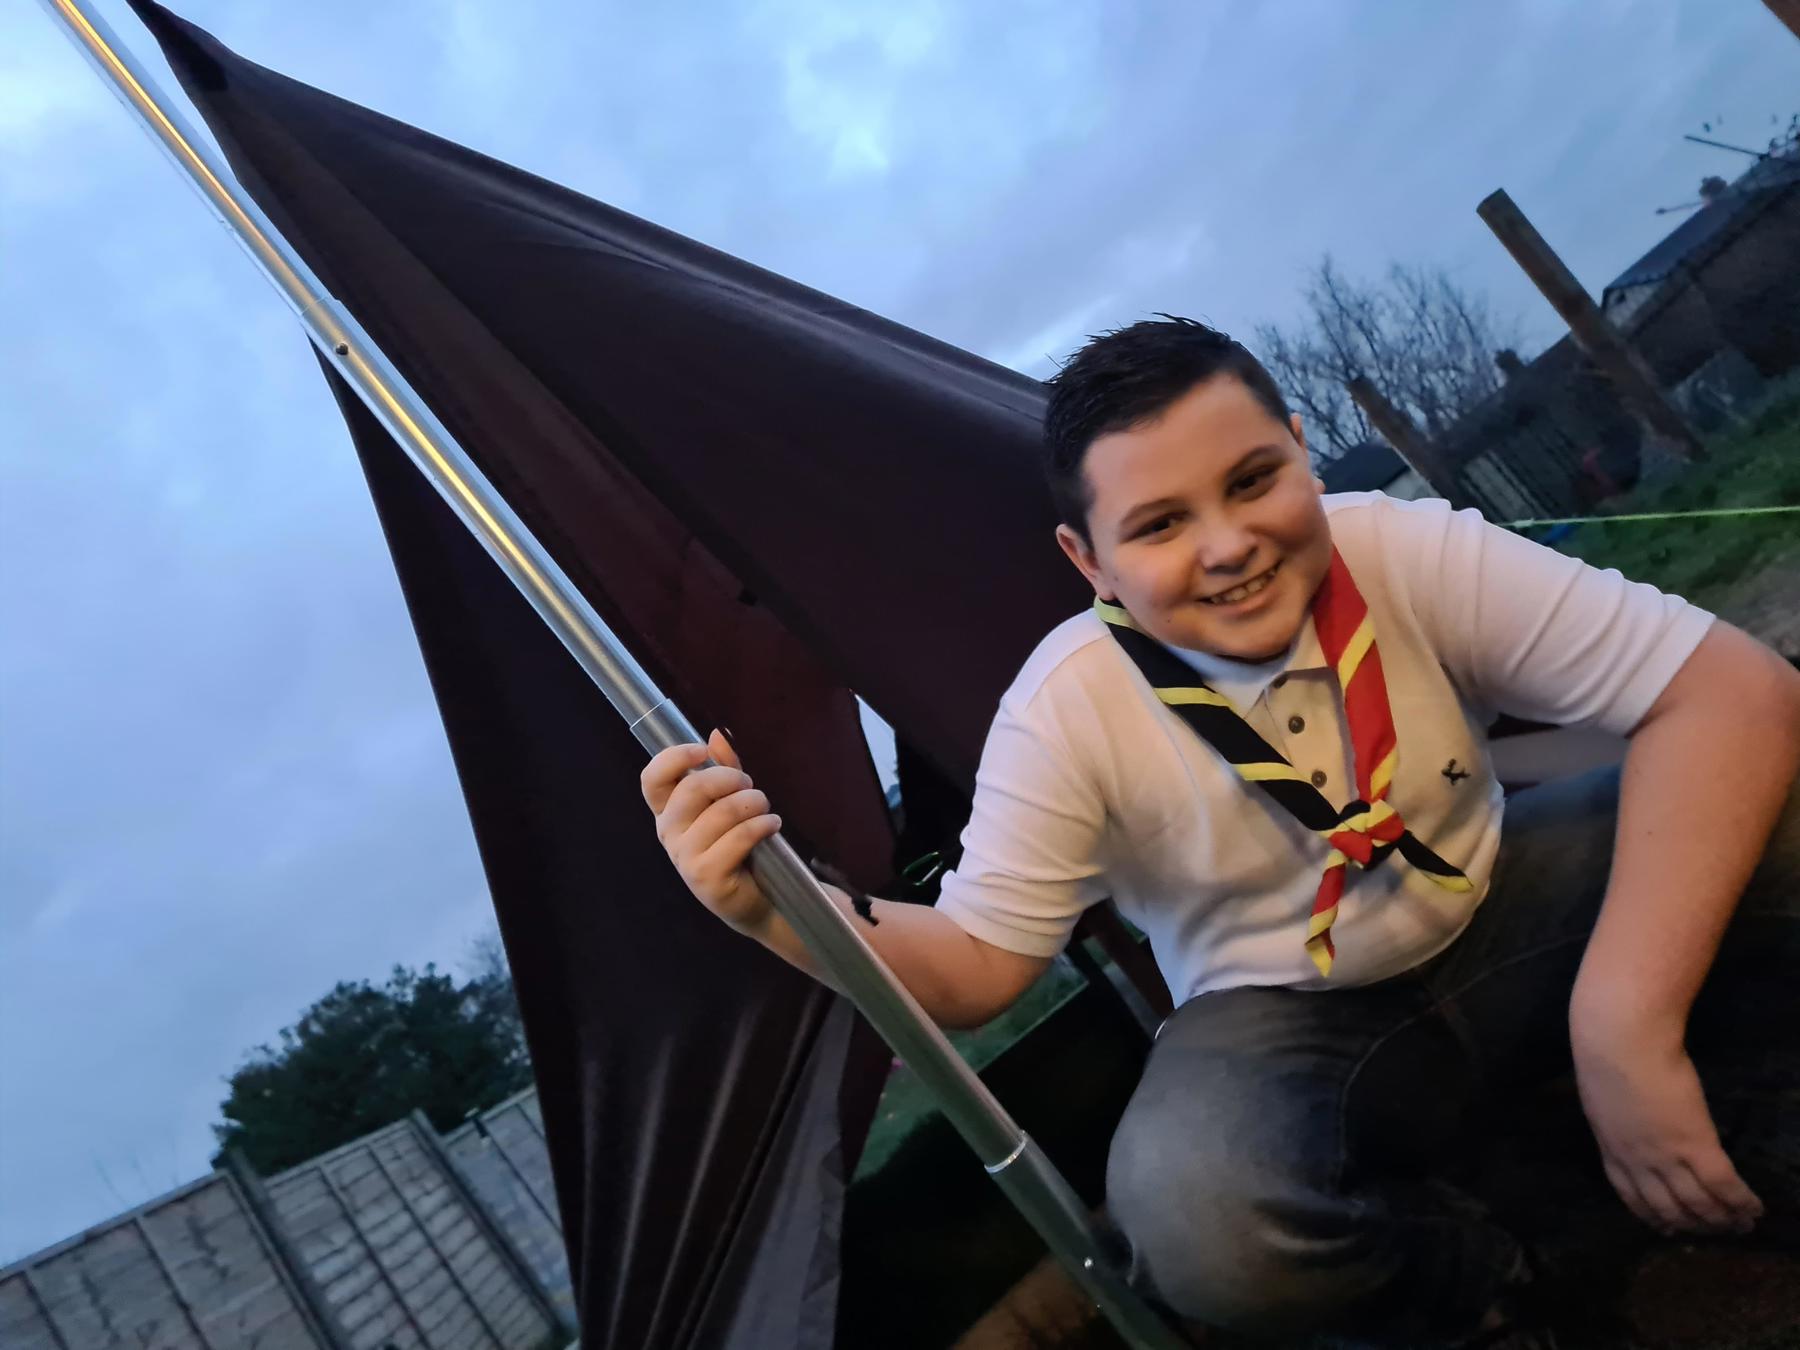 Leo sat outside his tent in the early evening in front of a cloudy sky. He's wearing his Scouts necker.